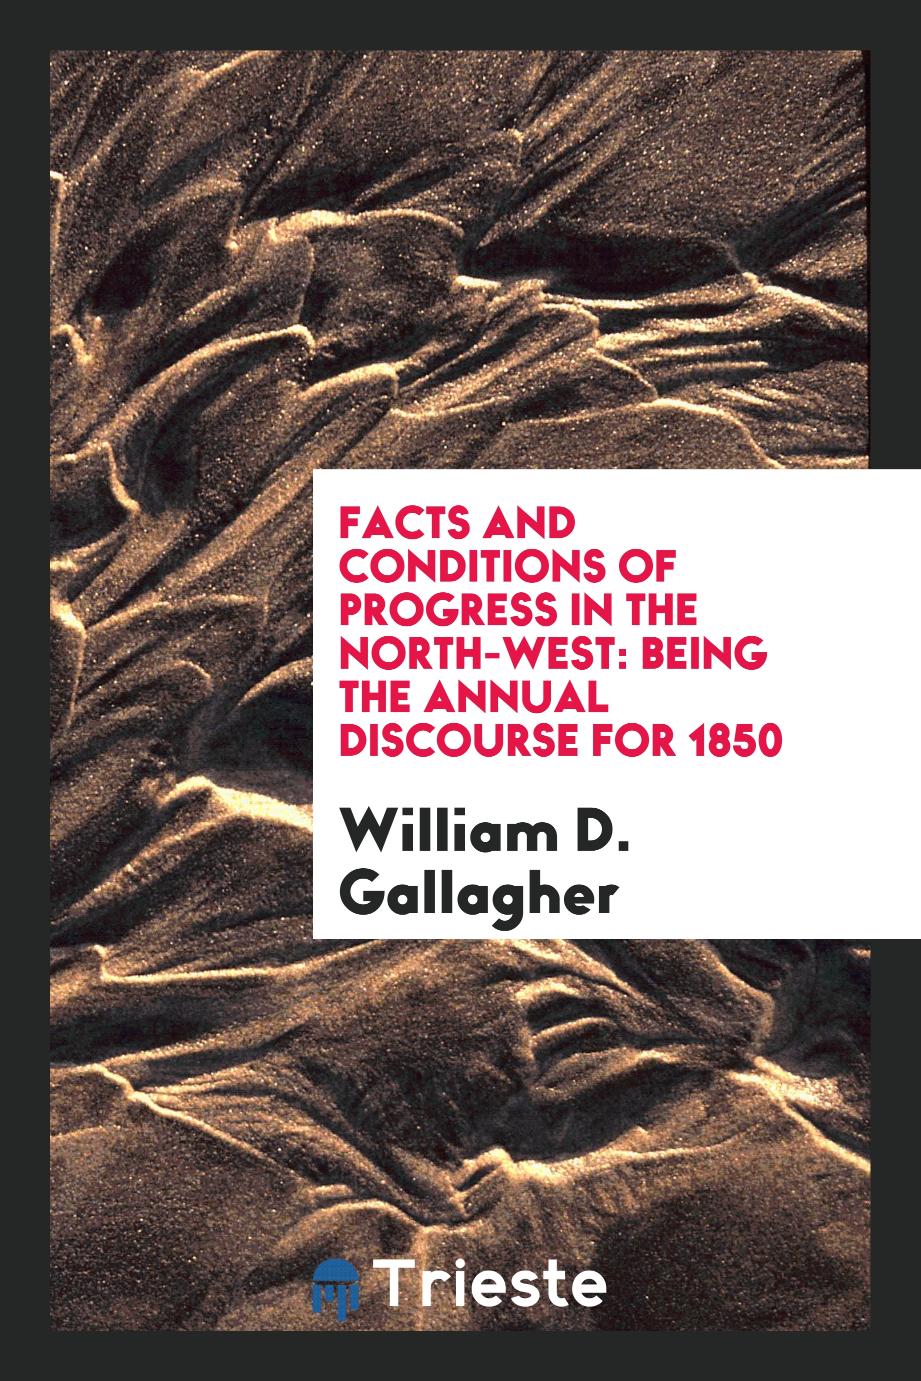 Facts and Conditions of Progress in the North-west: Being the Annual Discourse for 1850